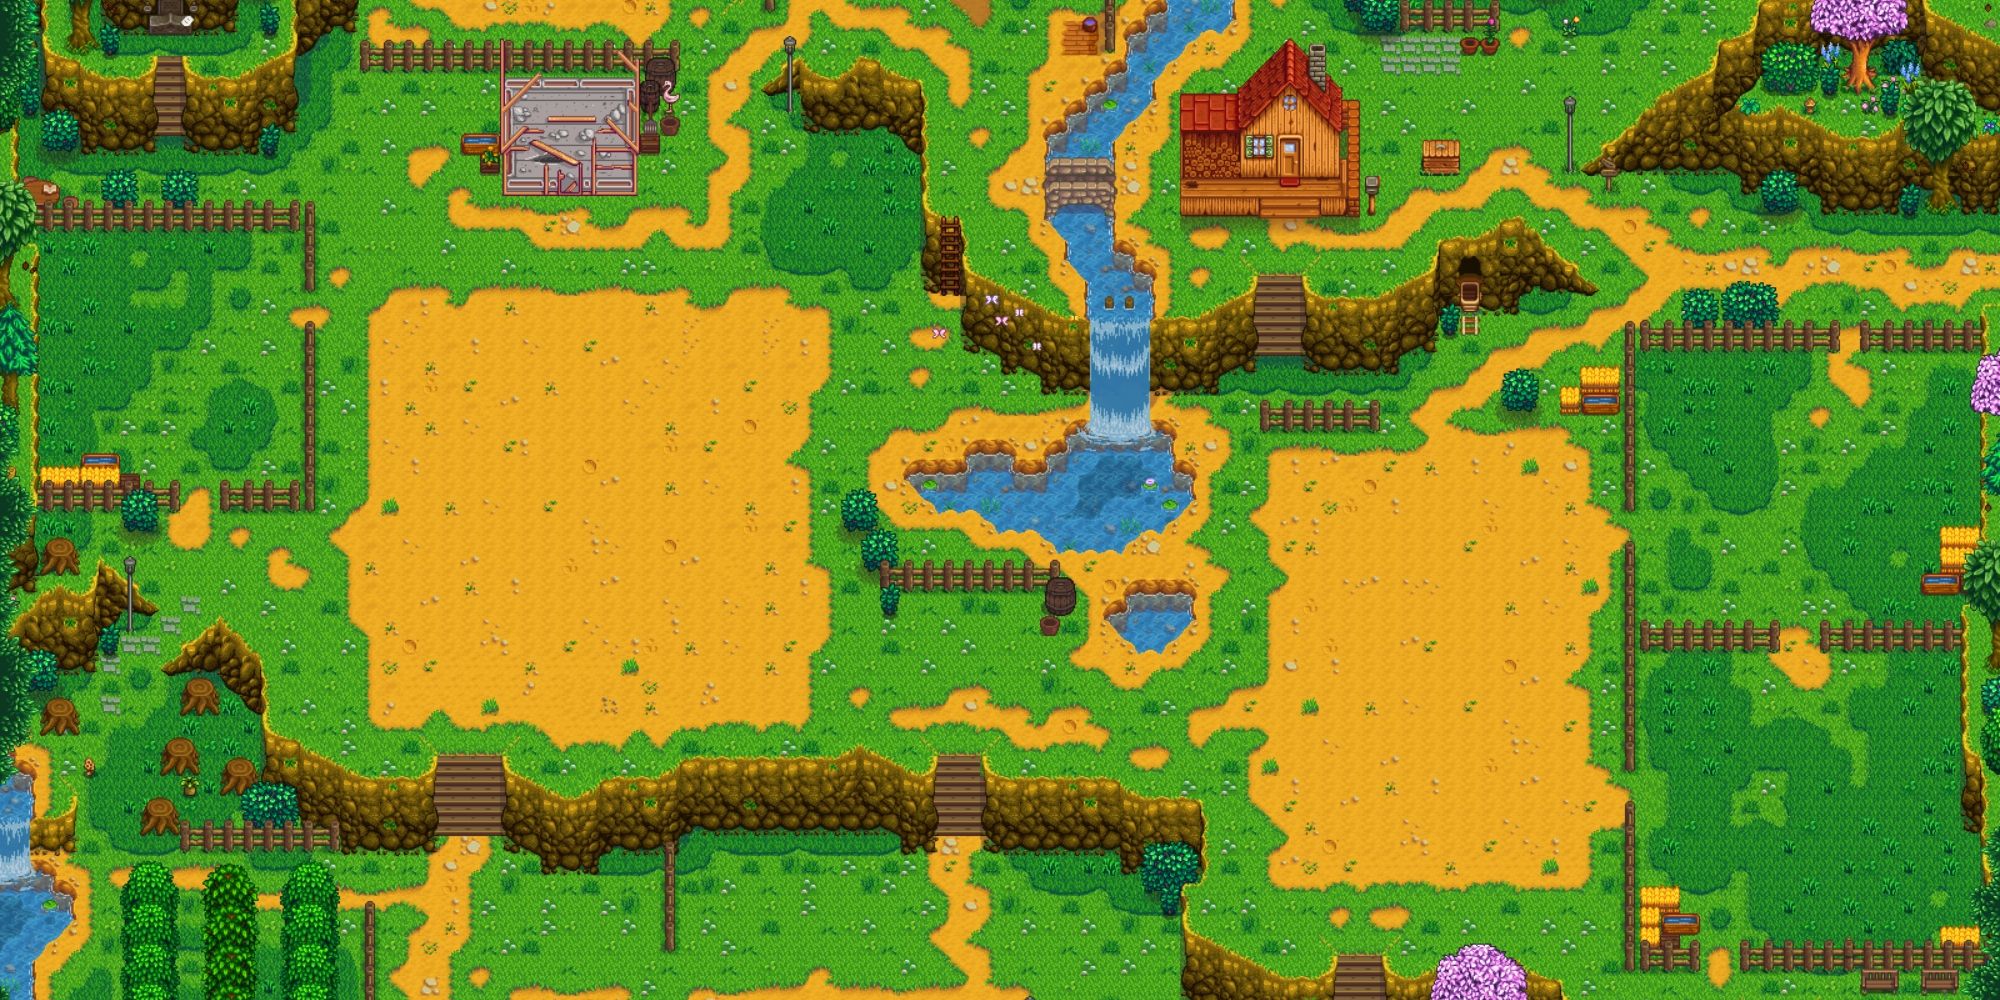 A Stardew Valley map with some dirt plots for crops and a waterfall flowing into a pond